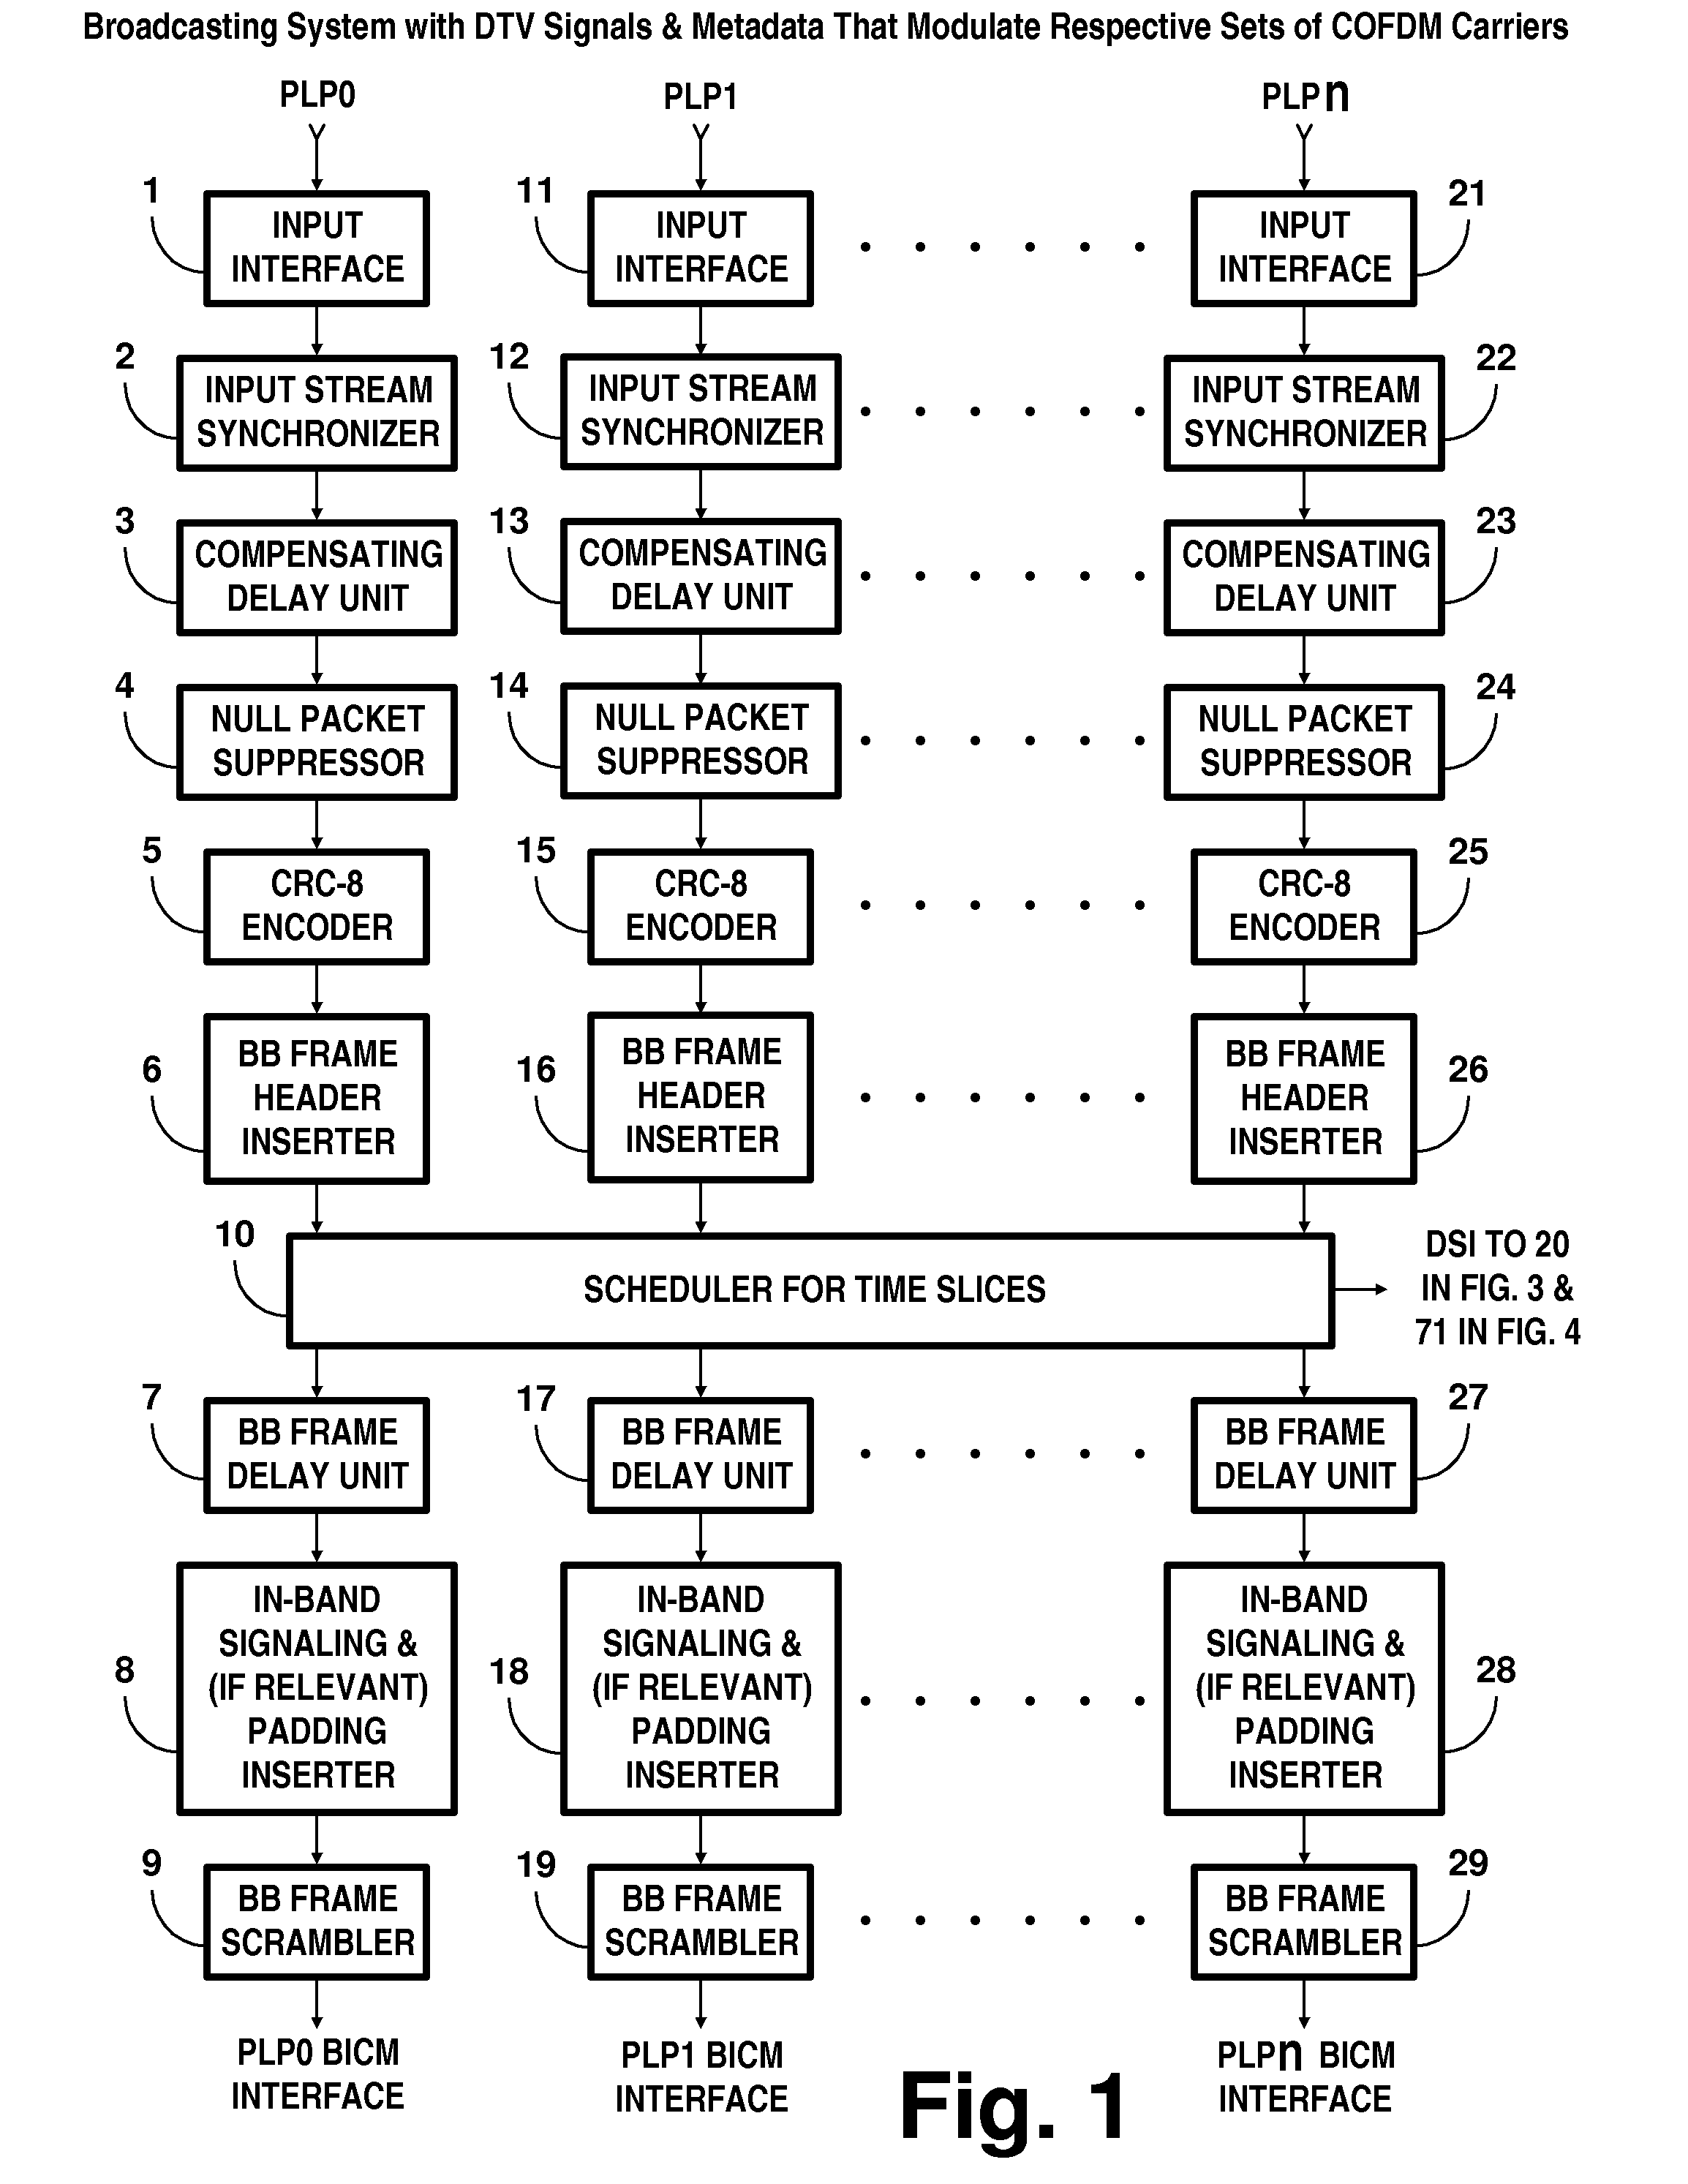 Broadcasting system with digital television signals and metadata that modulate respective sets of OFDM carriers